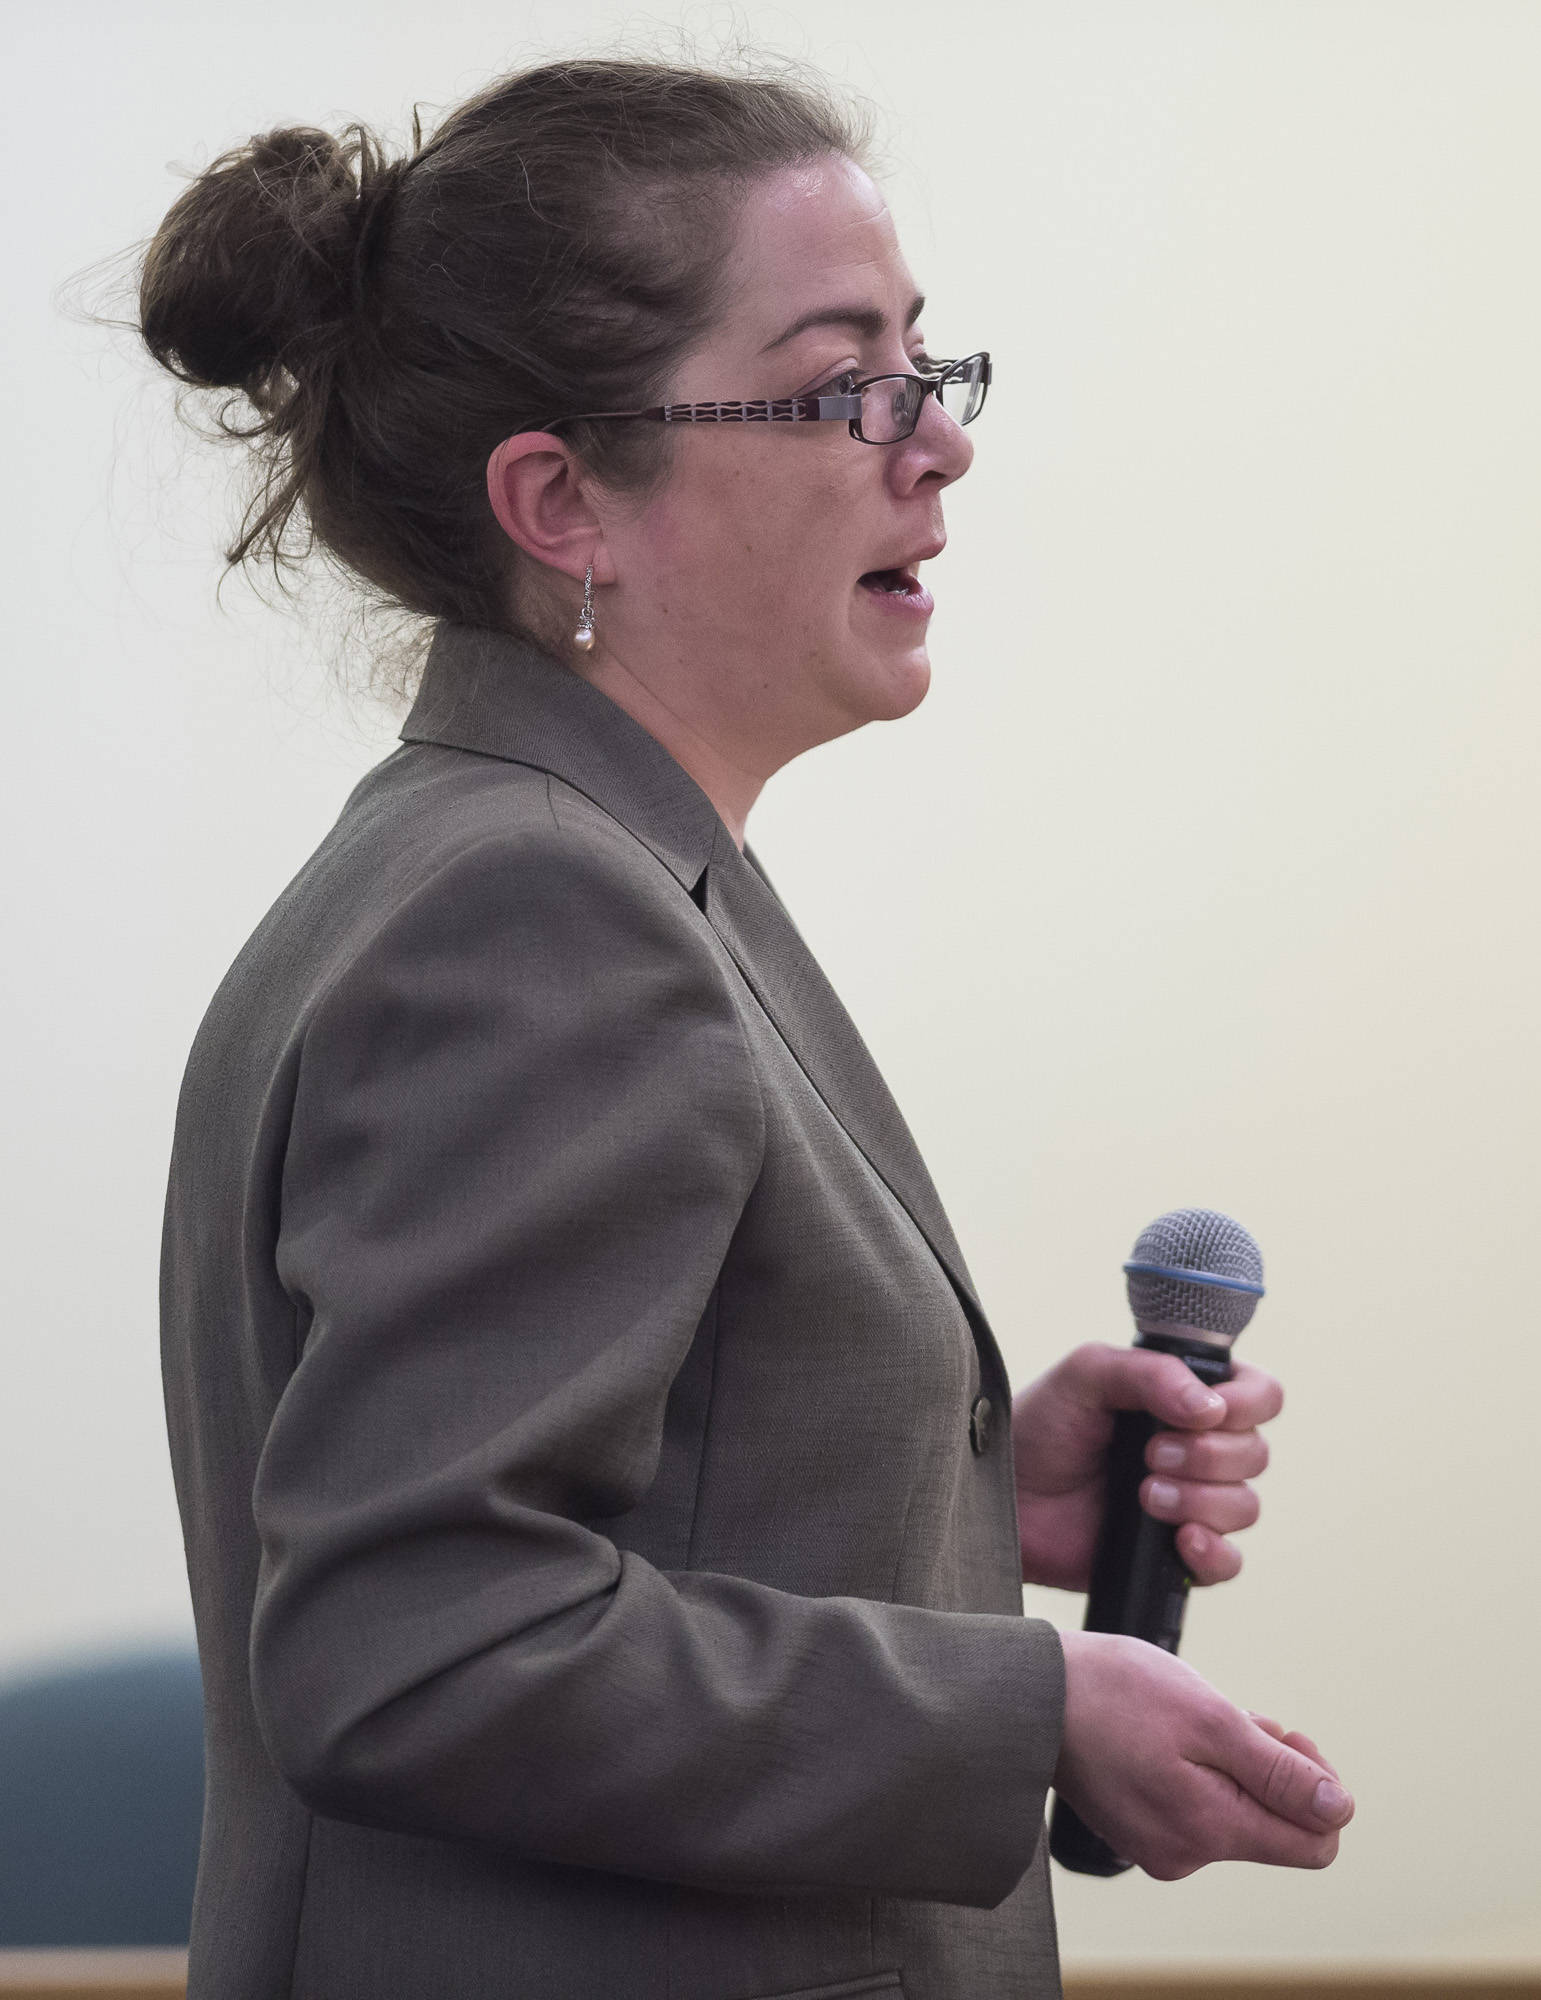 Assistant Public Defender Deborah Macaulay gives her opening statement in the trial of Mark De Simone in Juneau Superior Court on Friday, April 27, 2018. De Simone is accused of killing Juneau jeweler Duilio Antonio “Tony” Rosales in 2016. (Michael Penn | Juneau Empire)